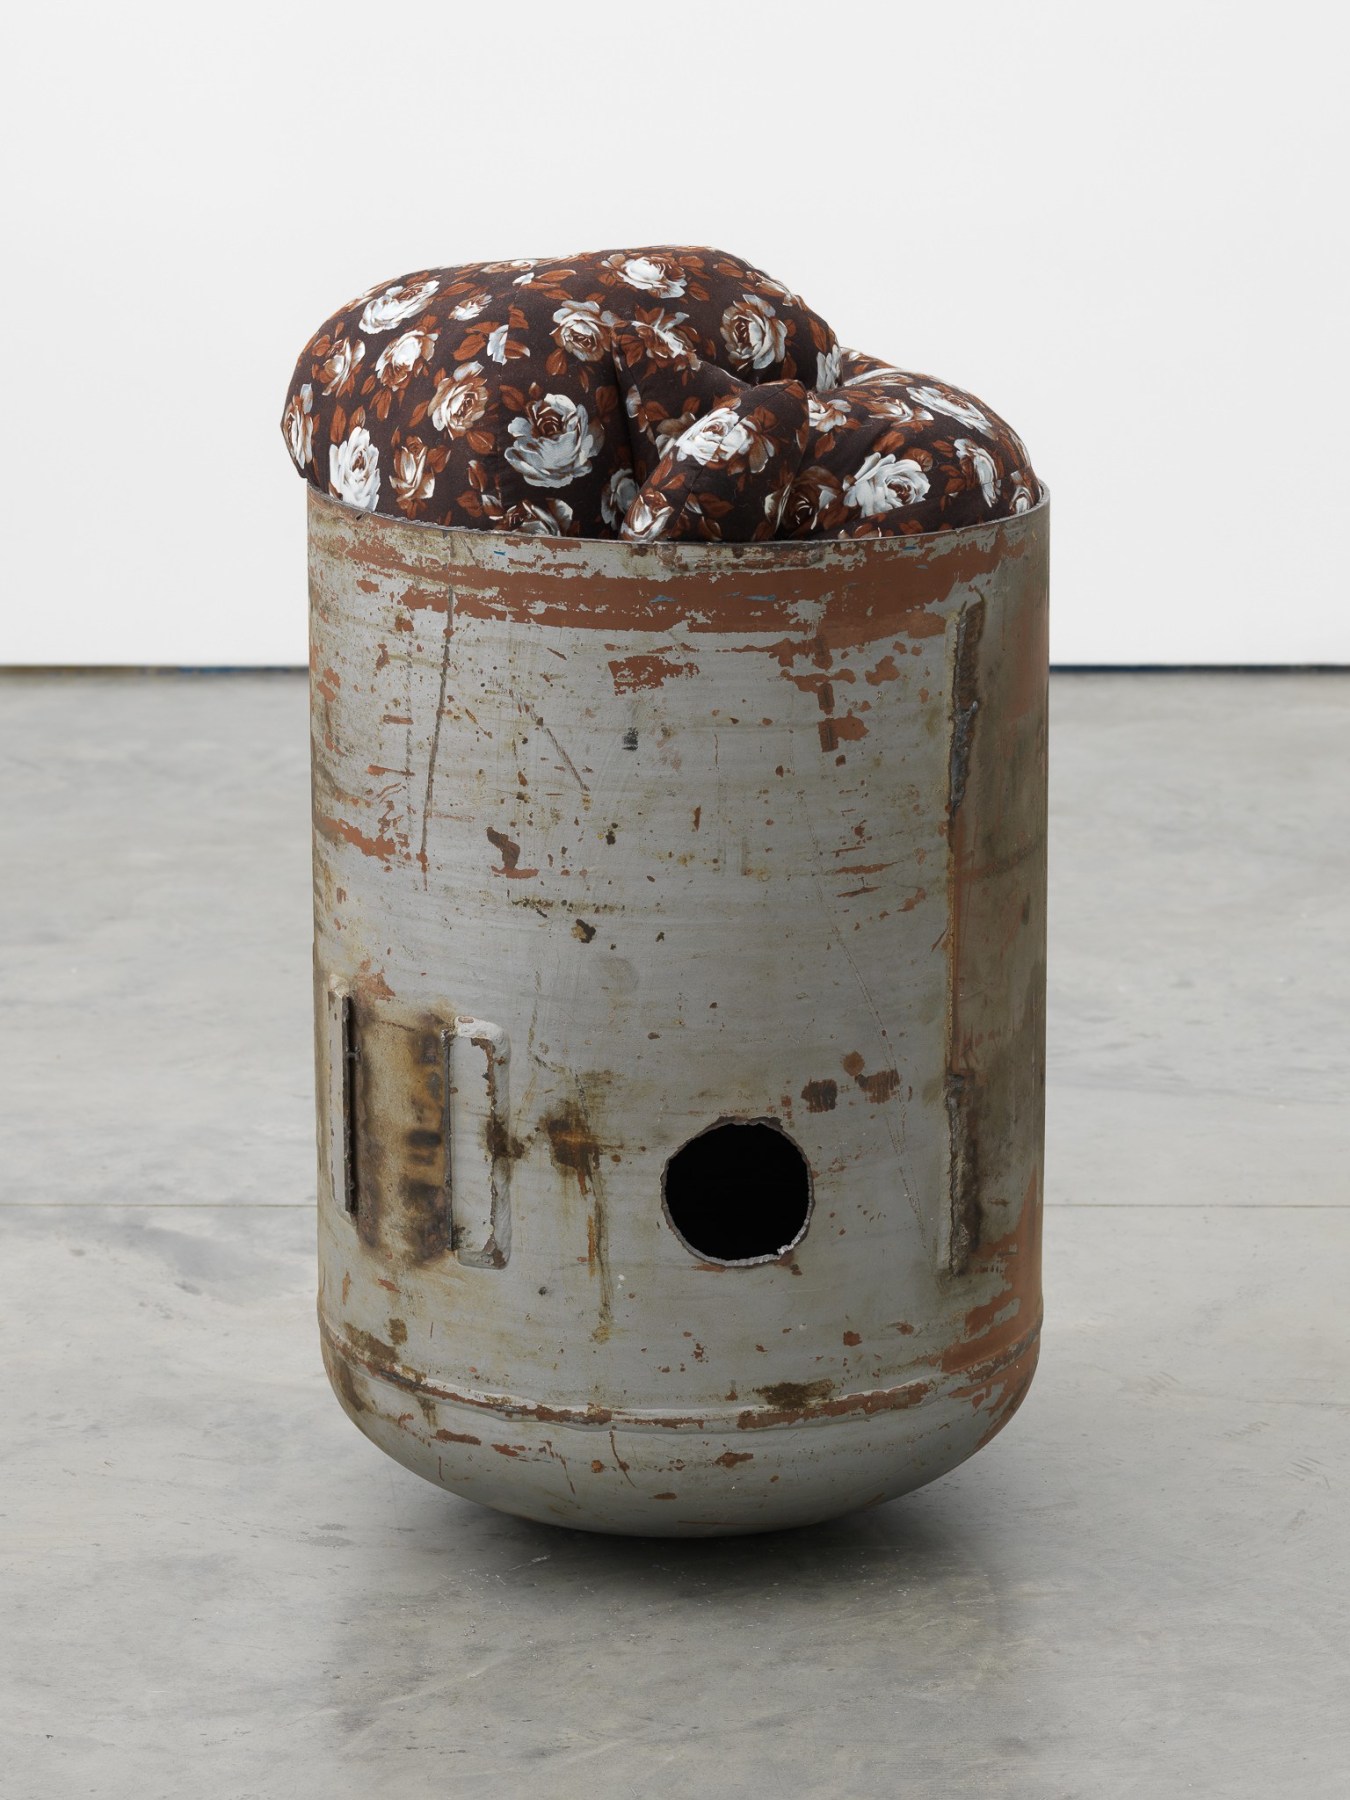 Elad Lassry, Untitled (Pod, Brown Floral, 3), 2018